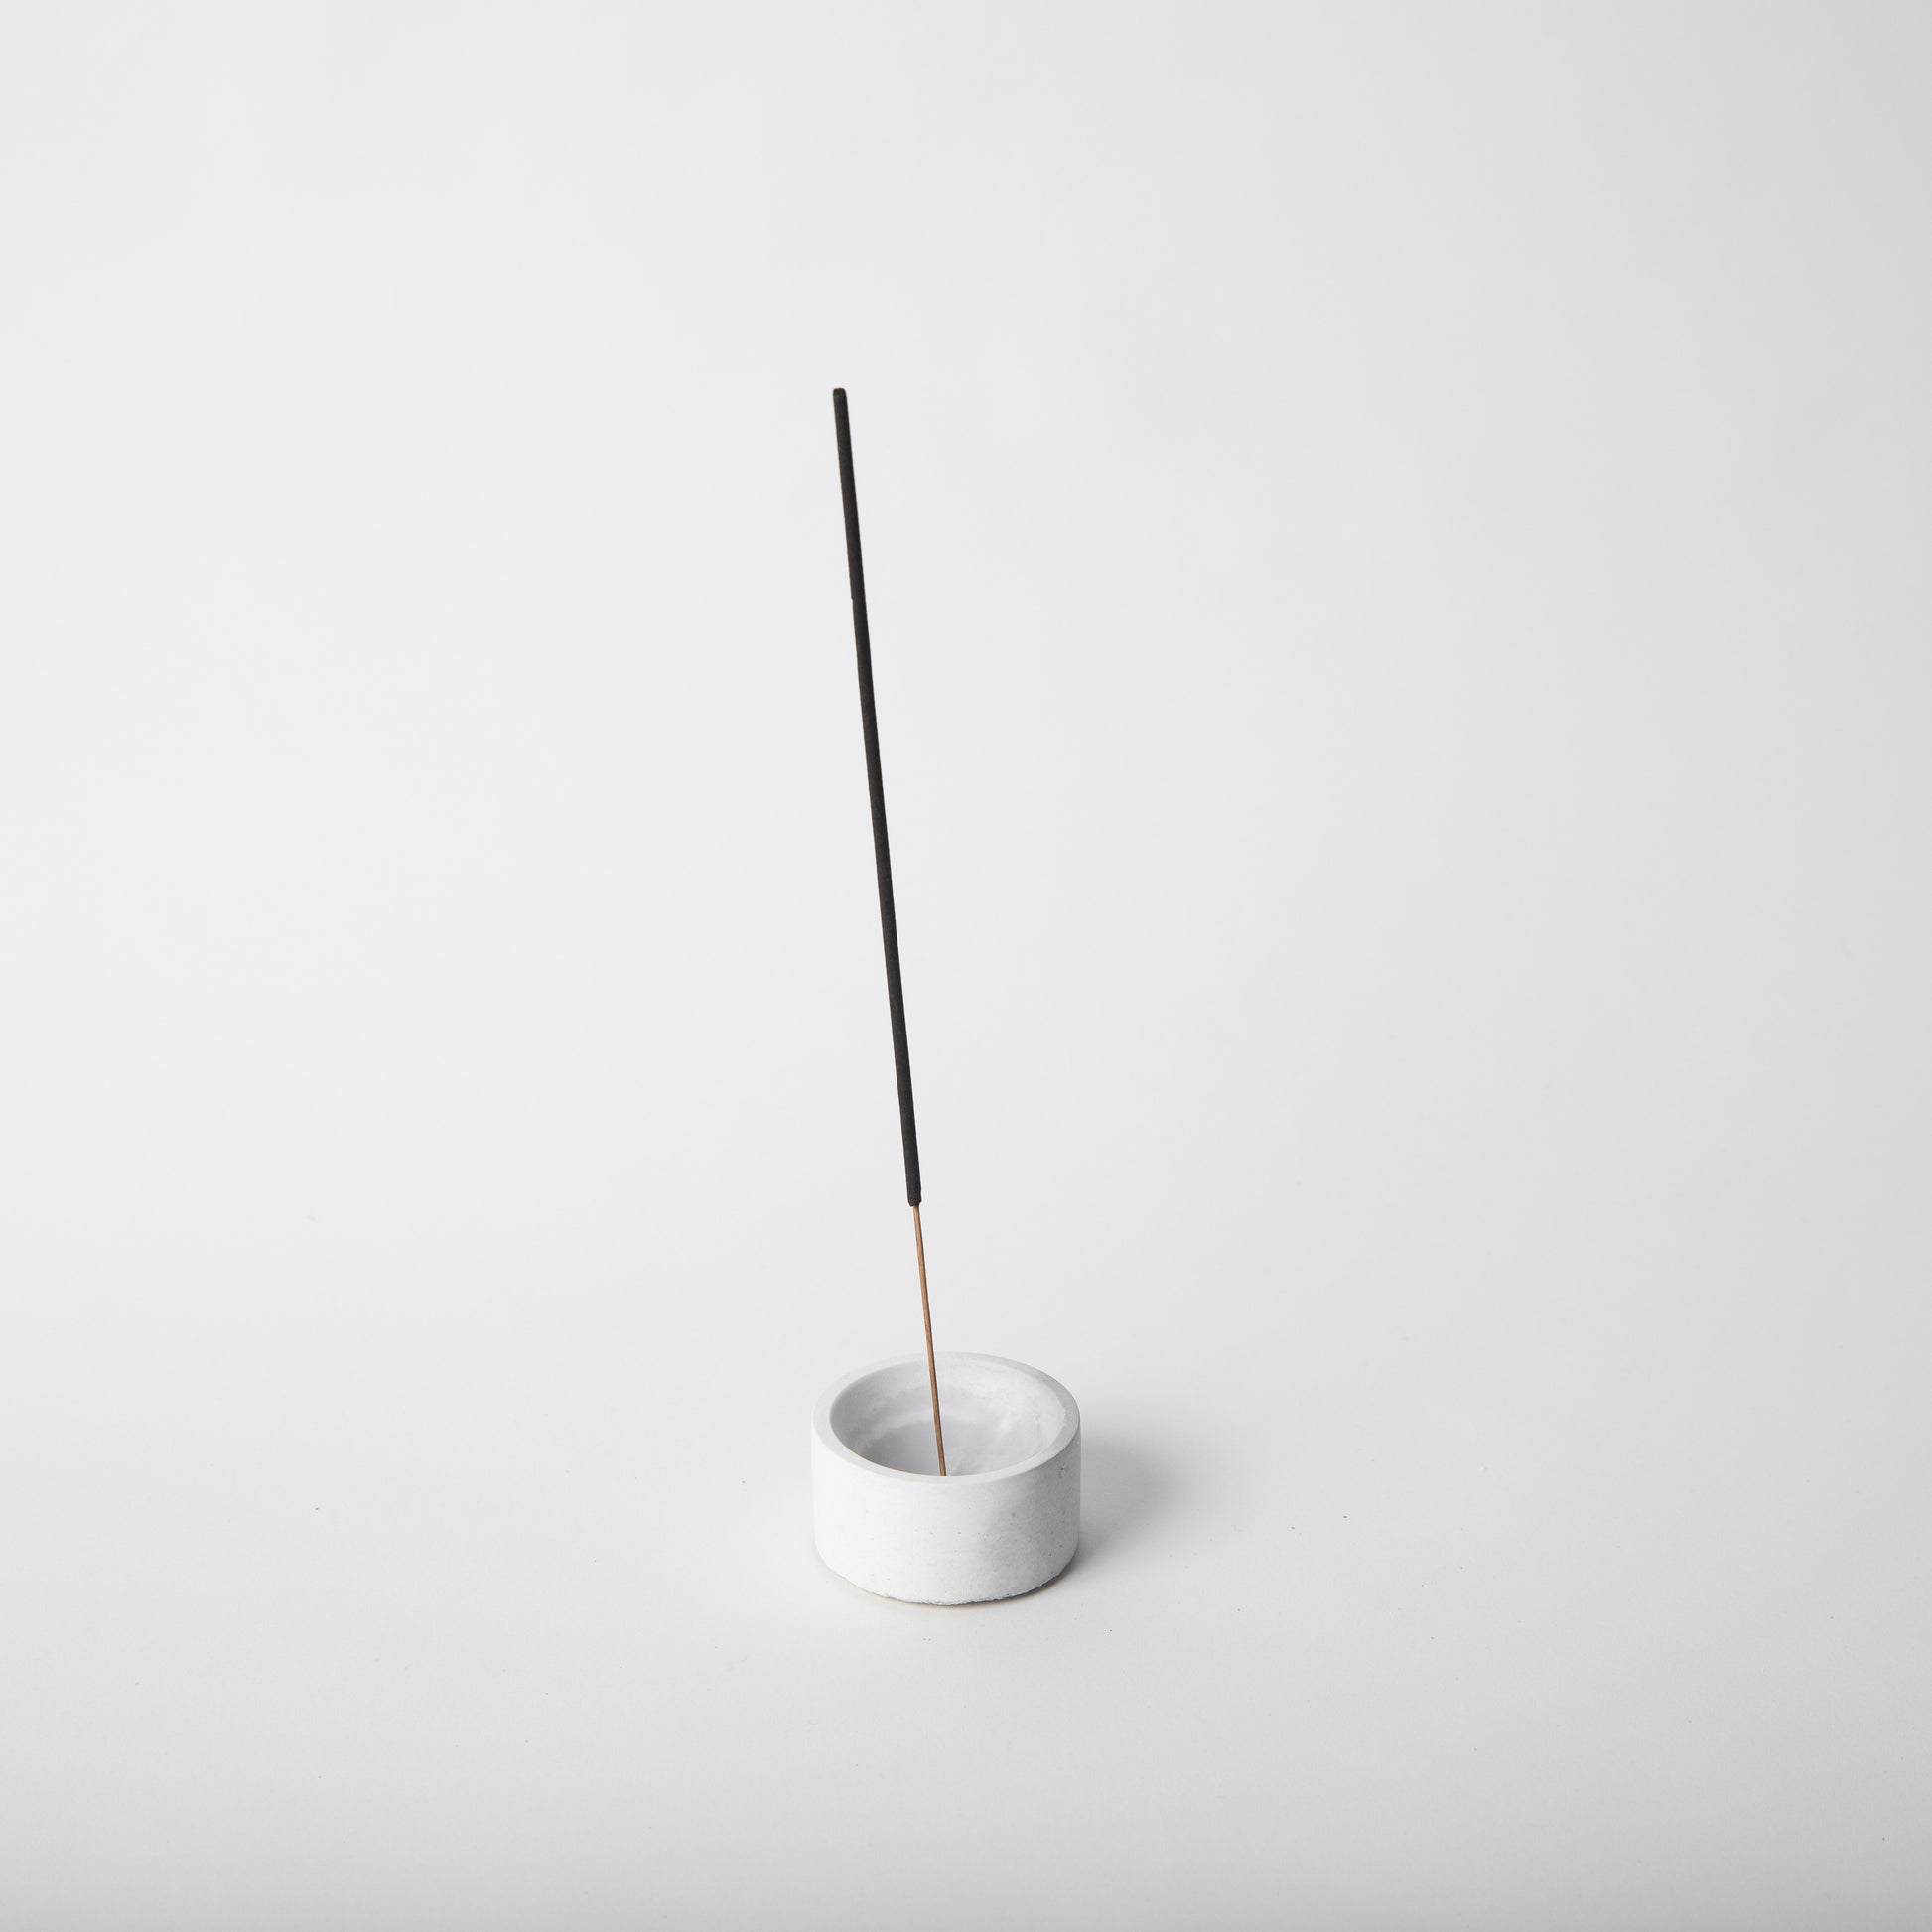 Round concrete incense holder in grey and white with an incense stick.